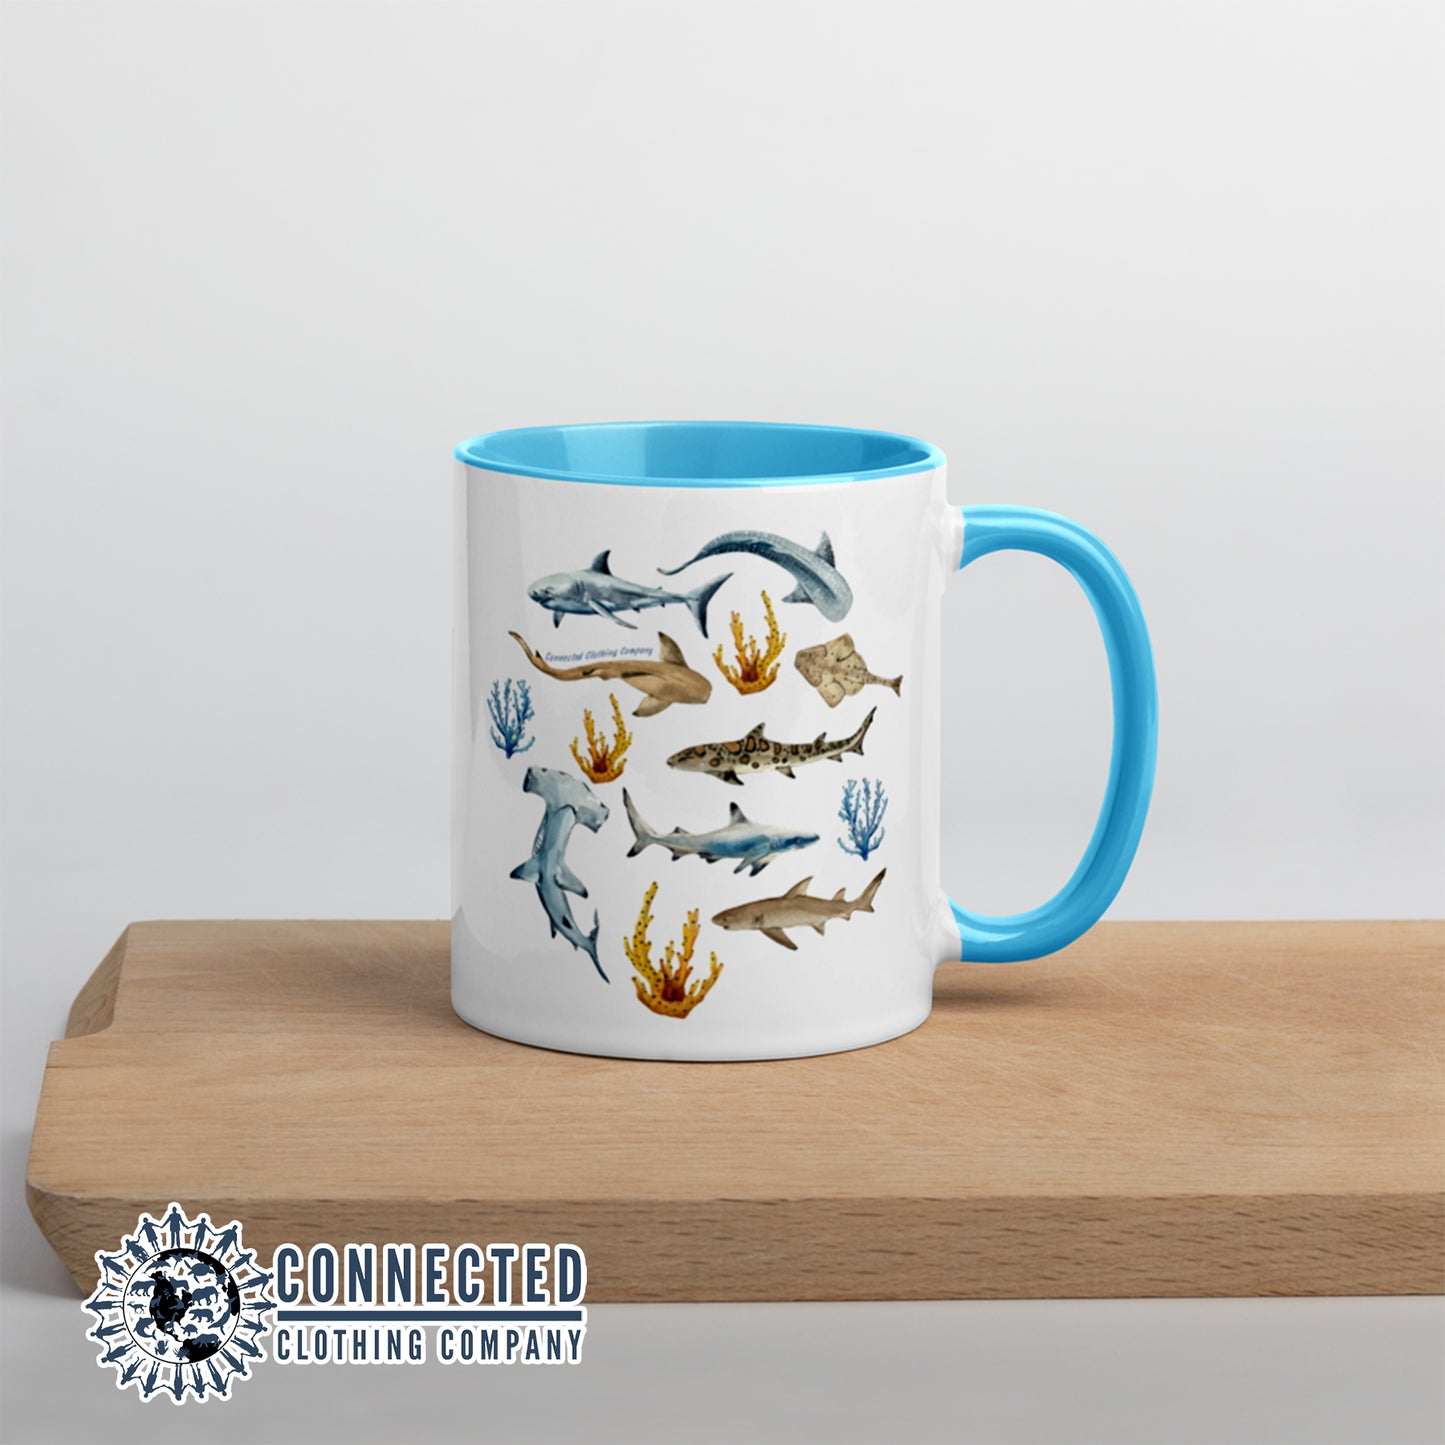 Shark Ocean Watercolor Colored Mug With Blue Coloring on Inside, Rim, and Handle - Connected Clothing Company - Ethically and Sustainably Made - 10% donated to Oceana shark conservation